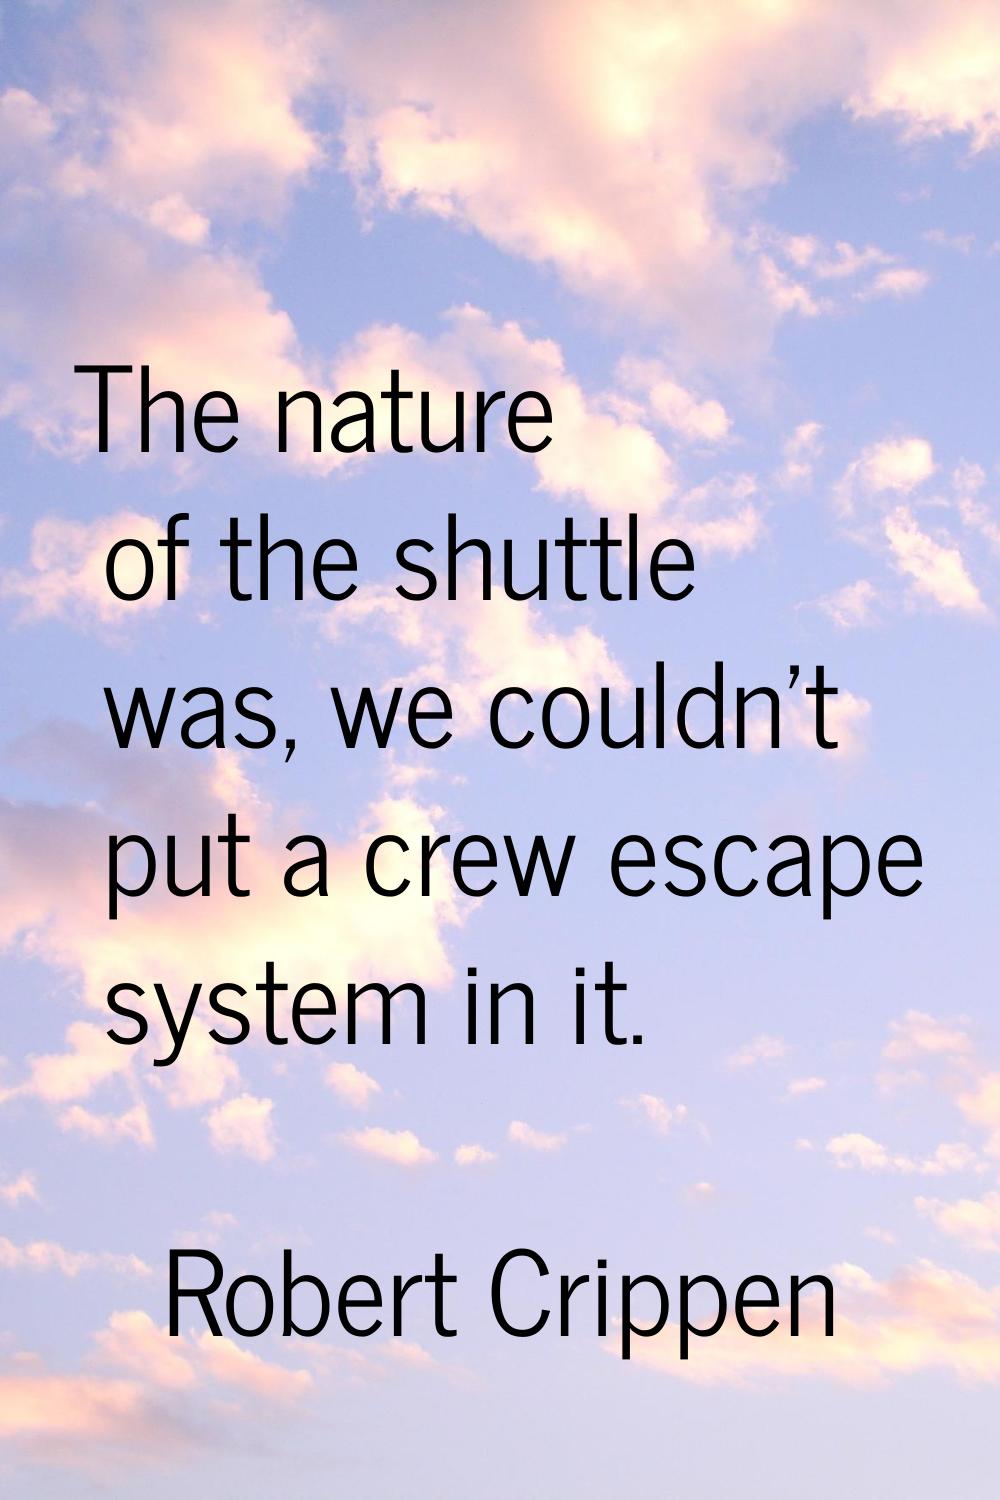 The nature of the shuttle was, we couldn't put a crew escape system in it.